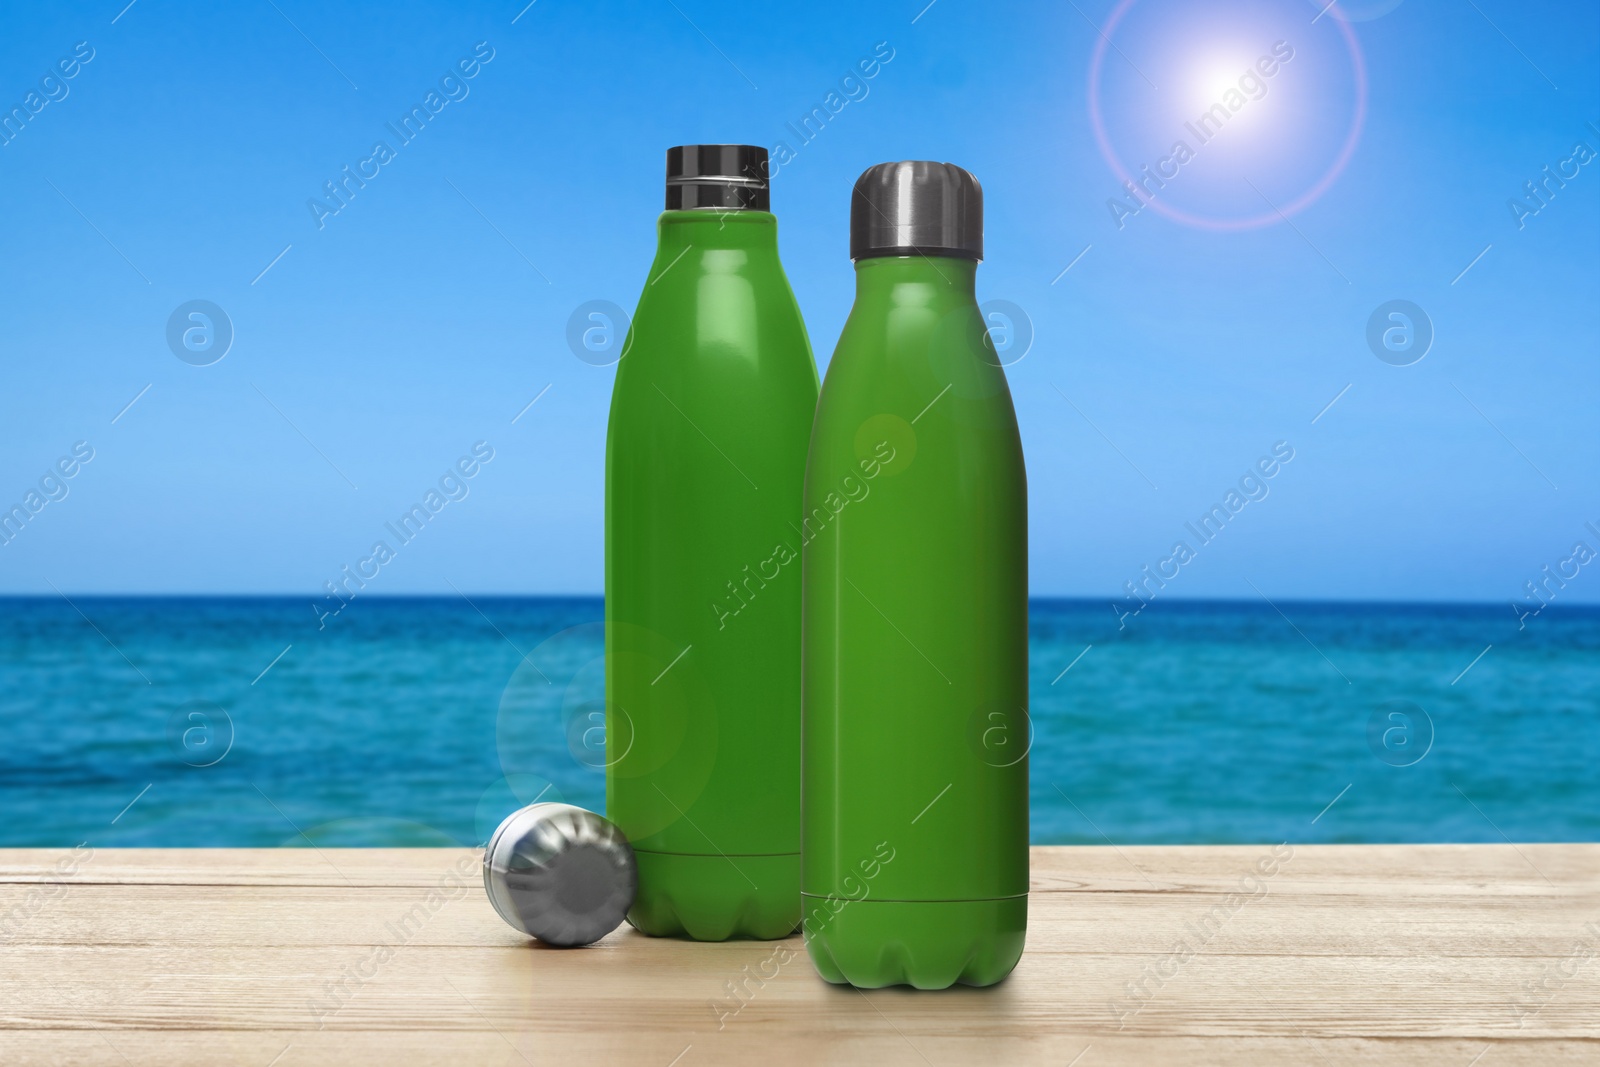 Image of Thermo bottles on wooden table near sea under blue sky